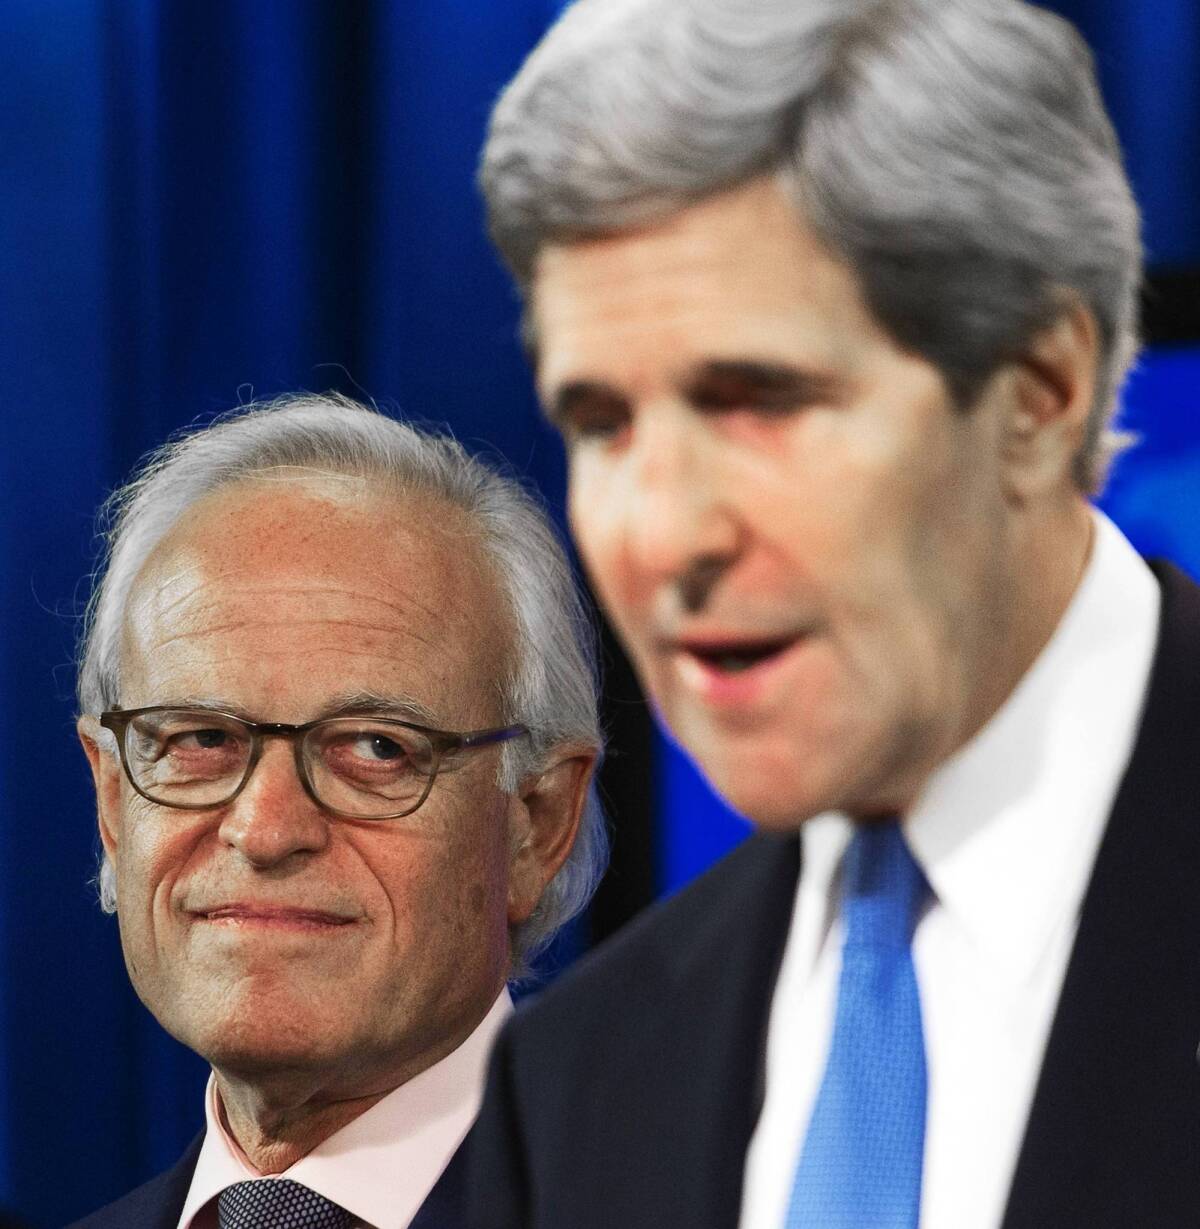 Secretary of State John F. Kerry announces the appointment of Martin Indyk, left, a former U.S. ambassador to Israel, as the new special envoy to oversee Israeli-Palestinian talks.